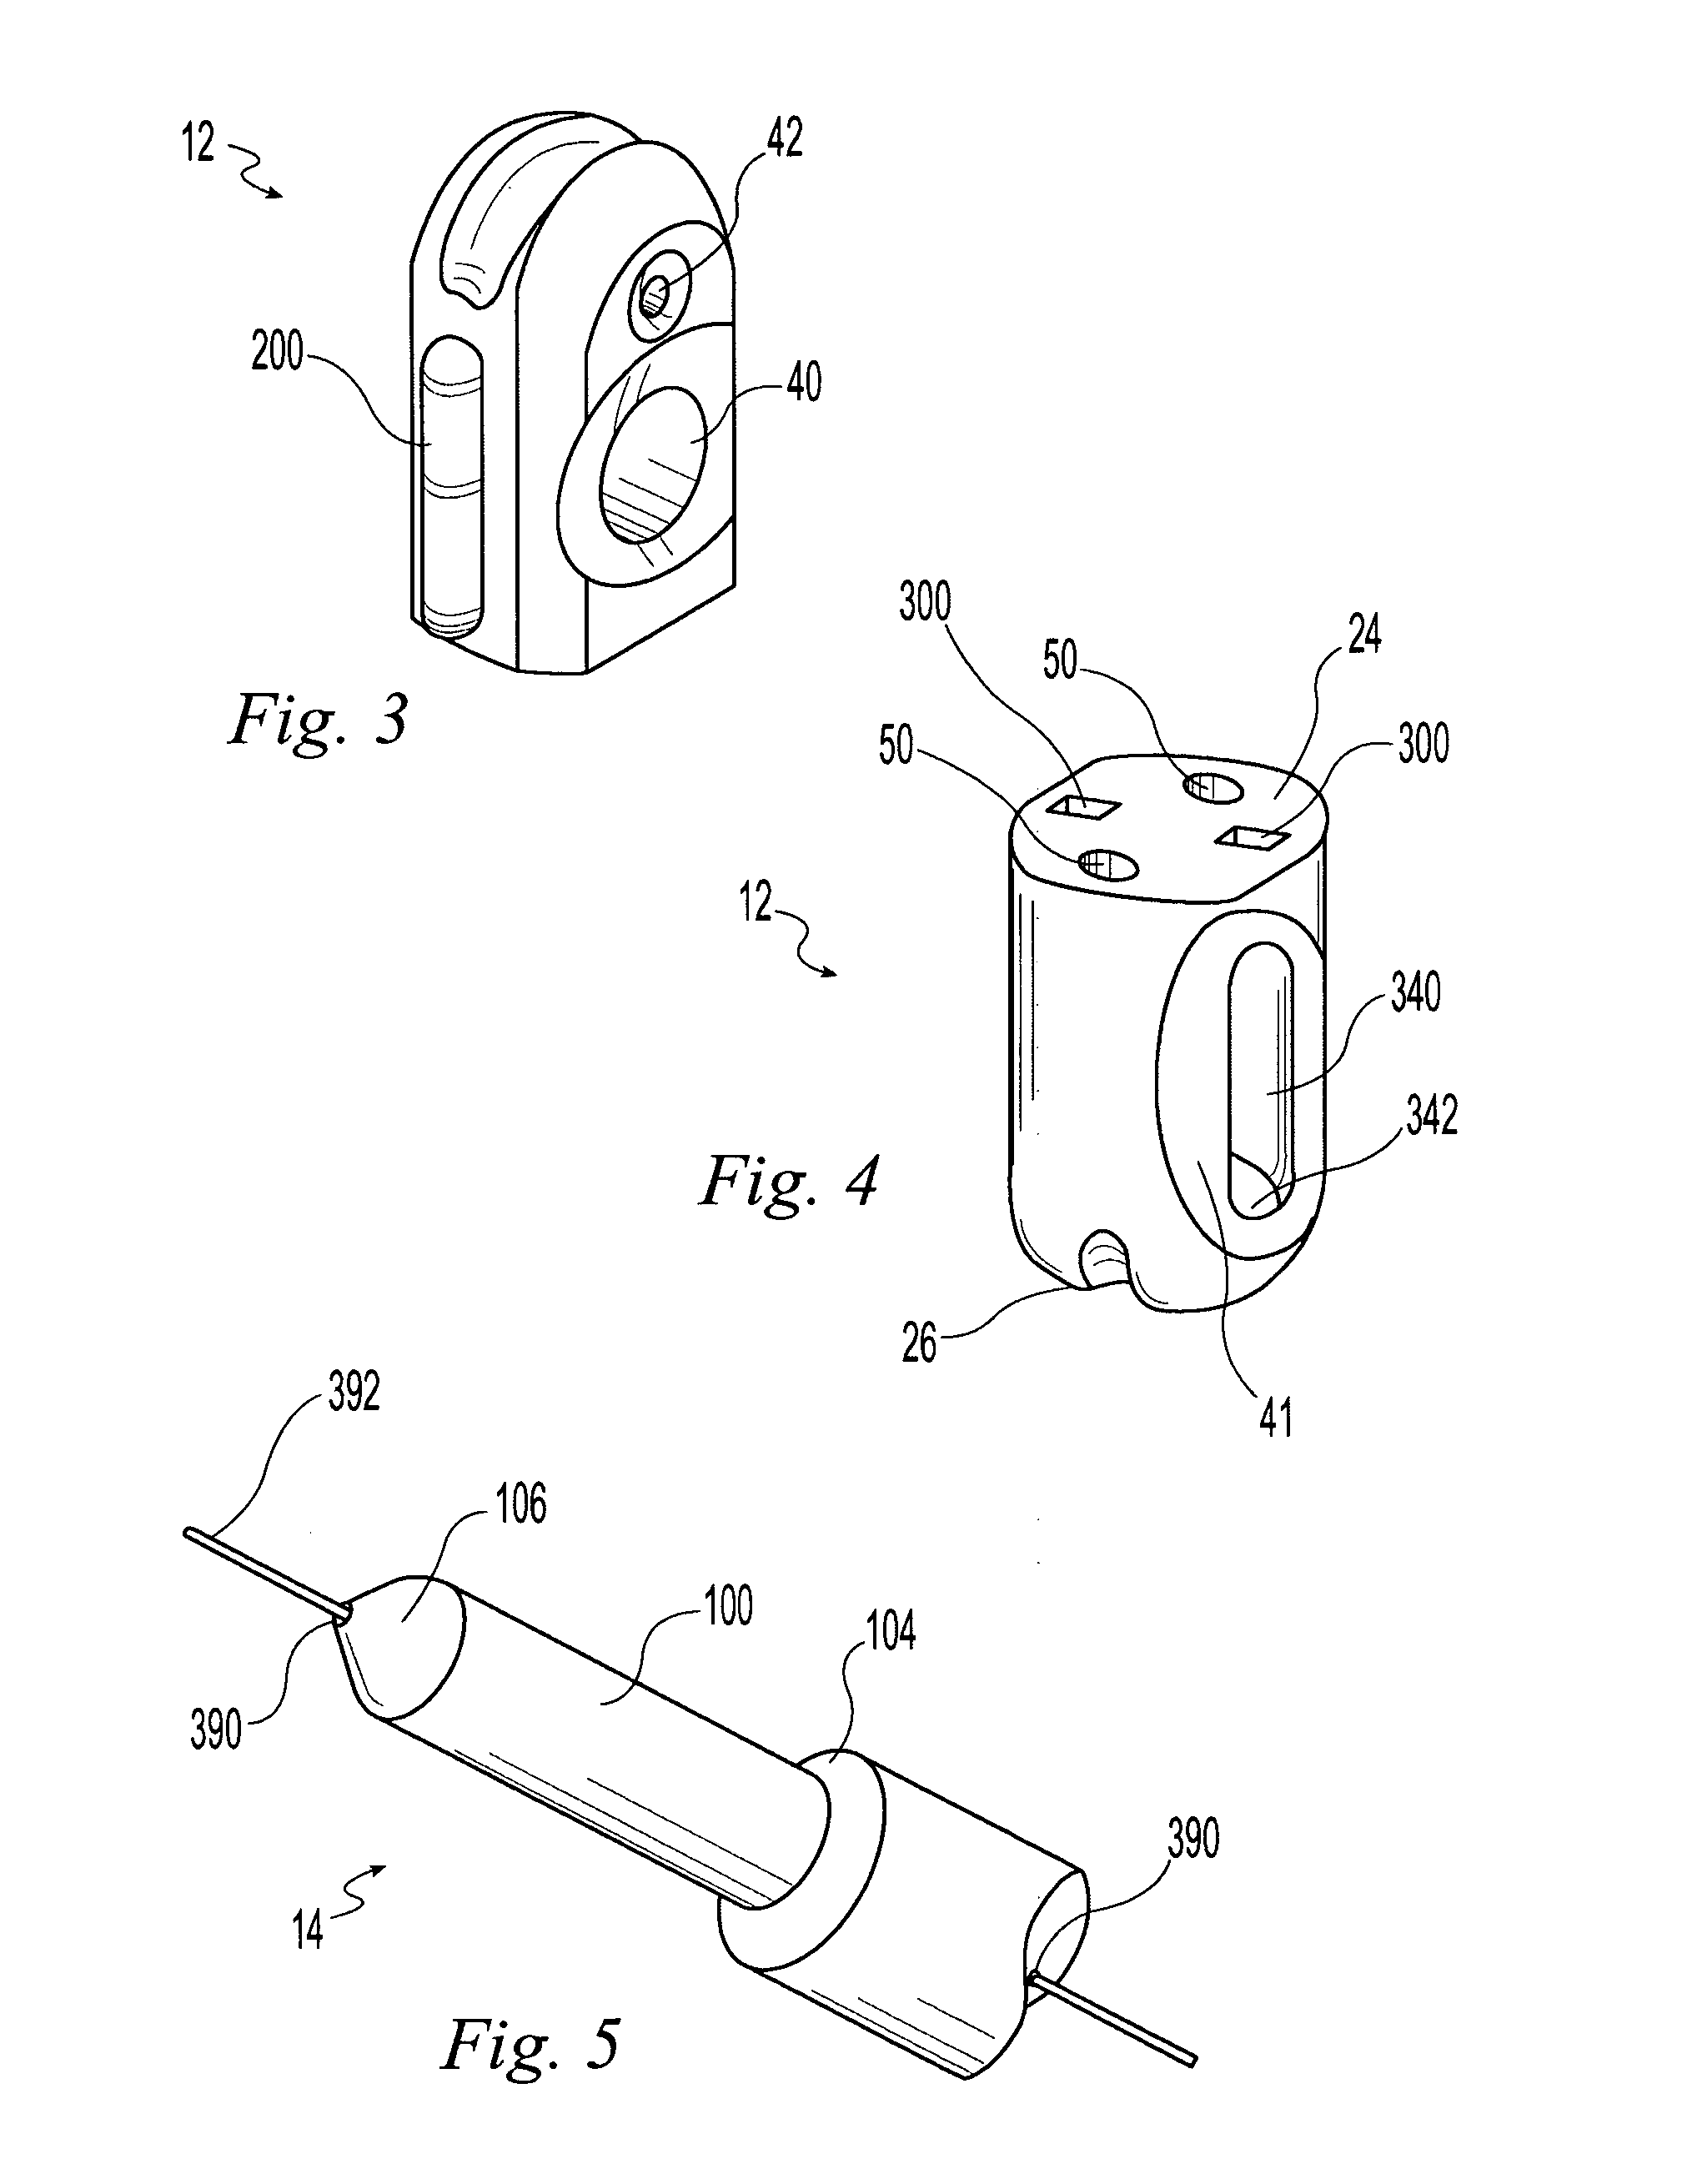 Cross-pin graft fixation, instruments, and methods